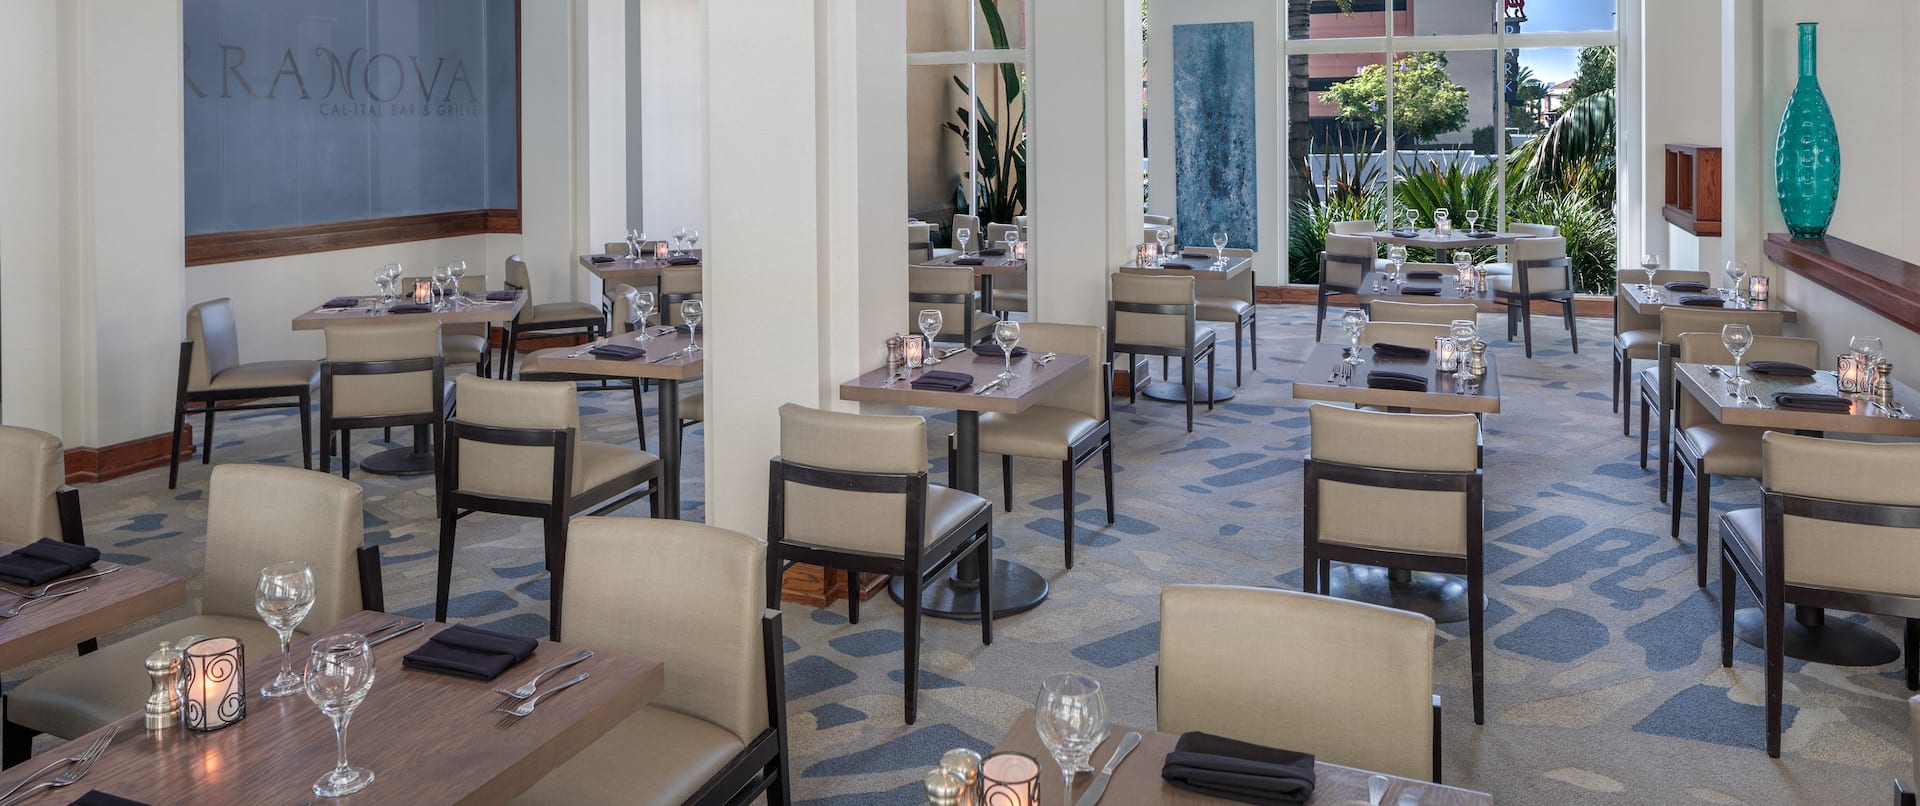 TerraNova Restaurant Dining Area with dining table, chairs, and floor-to-ceiling windows with an outdoor view